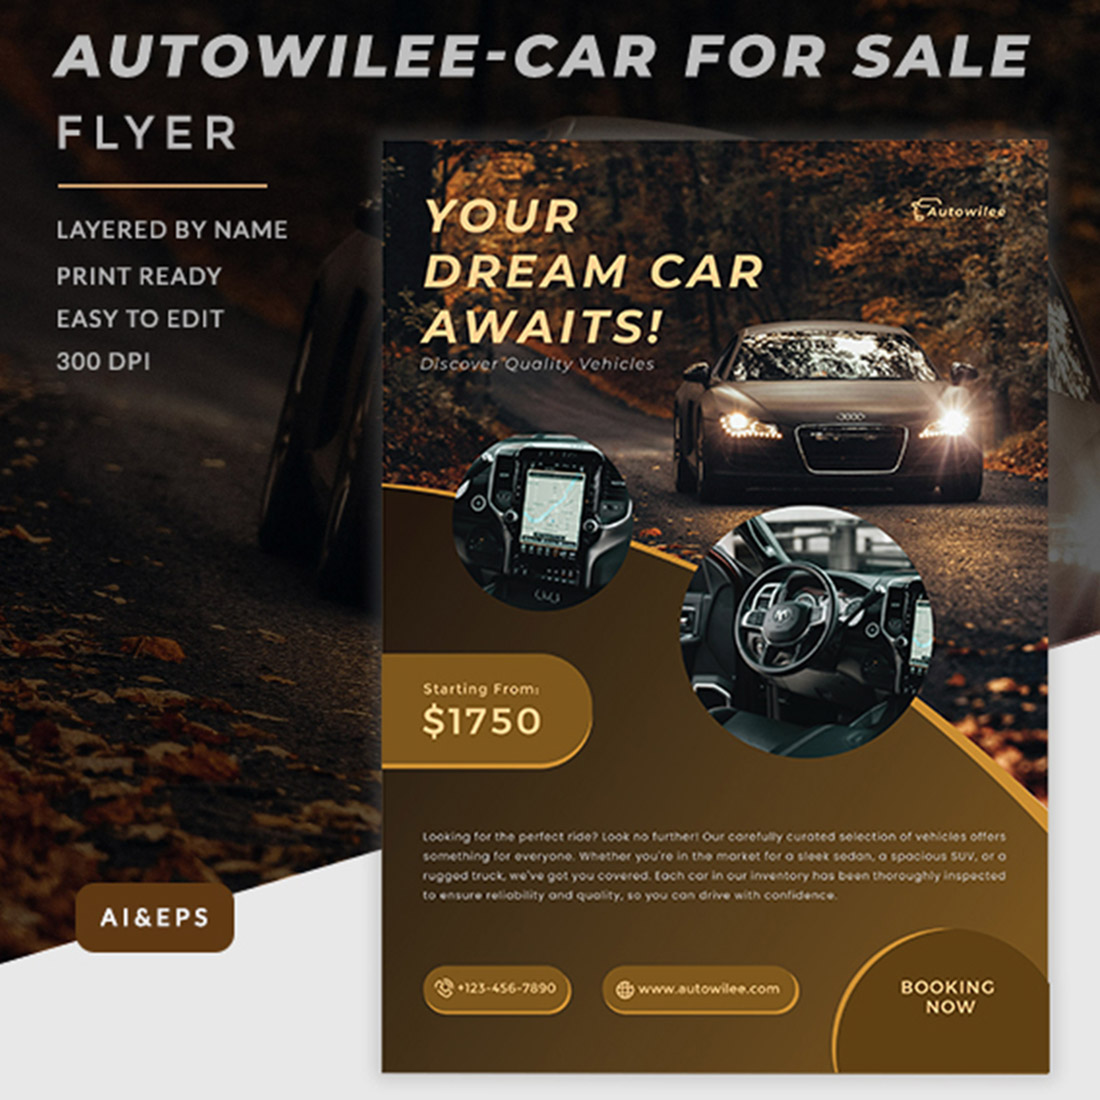 Autowilee Car For Sale Flyer Template cover image.